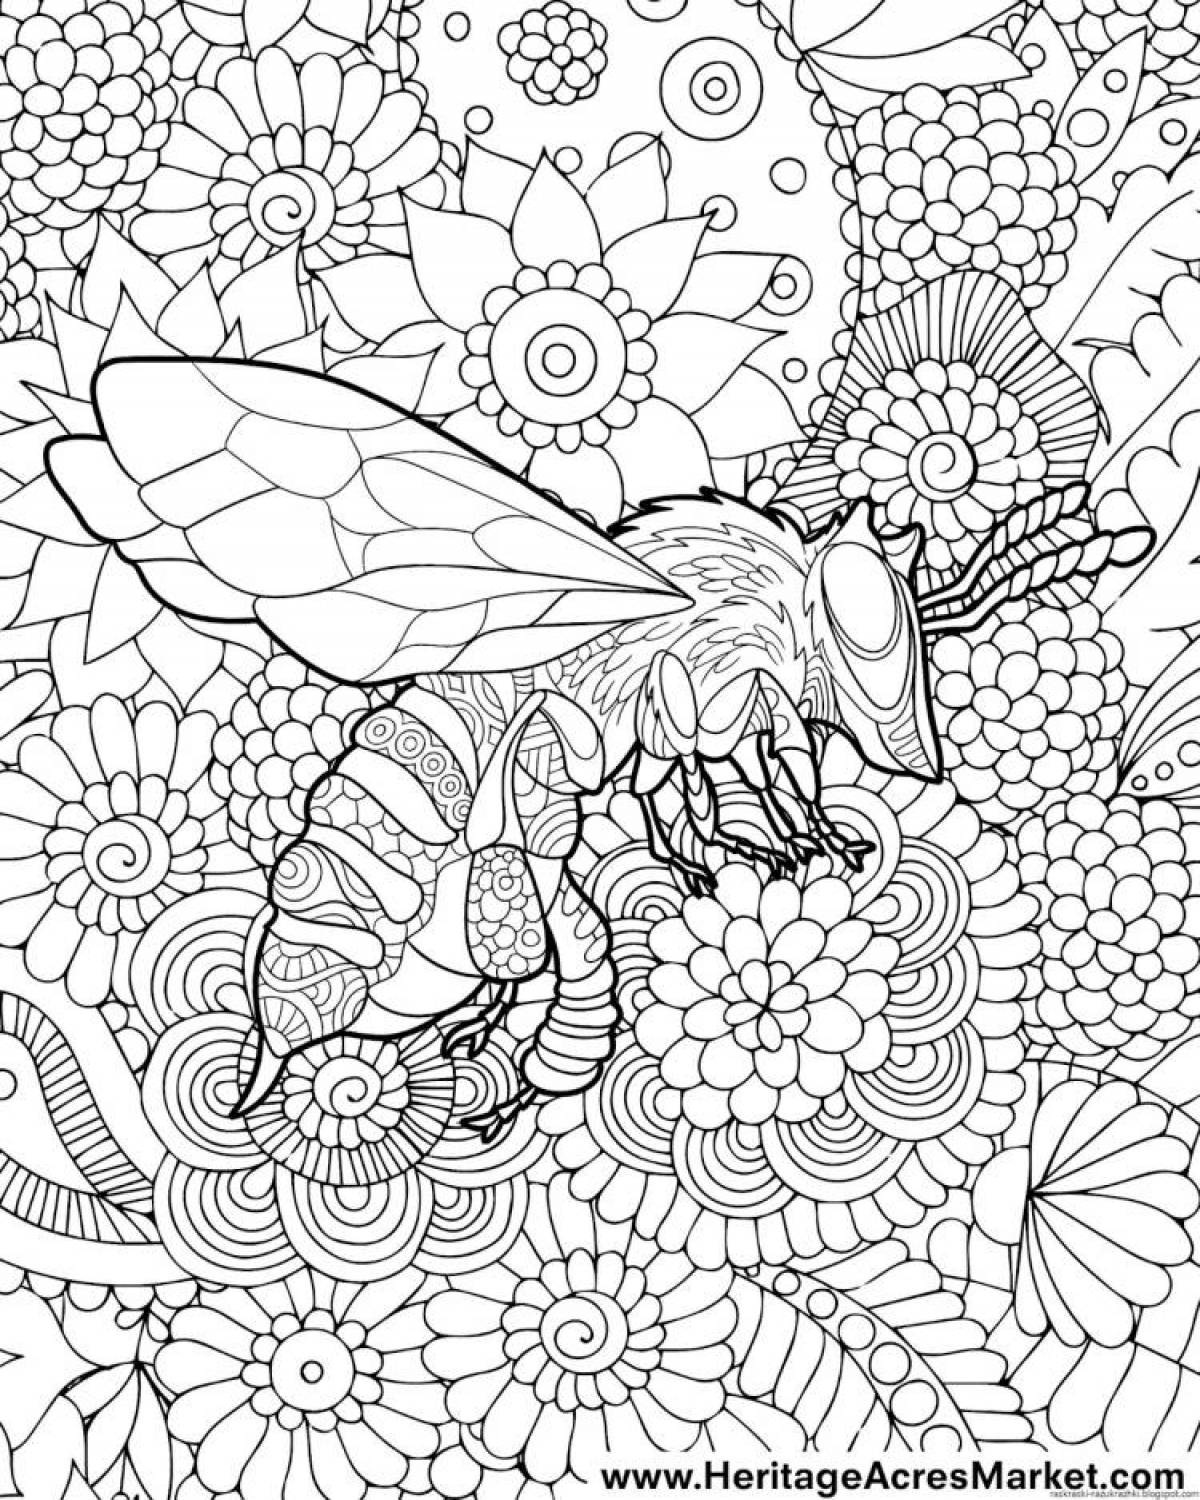 Adorable coloring book for all adults